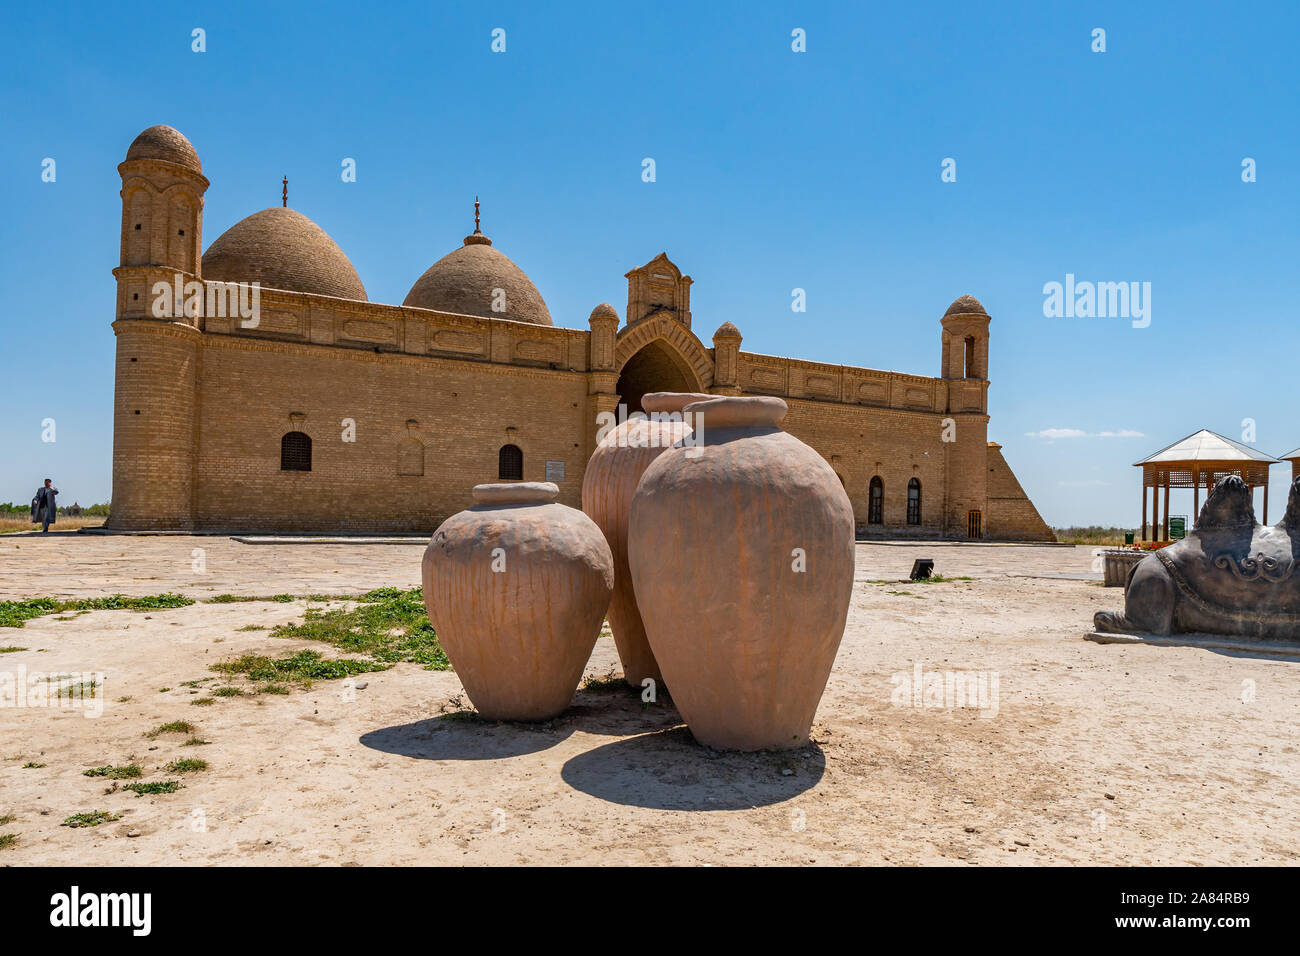 Turkestan Arystan Bab Mausoleum Breathtaking Picturesque View with Clay Pots on a Sunny Blue Sky Day Stock Photo